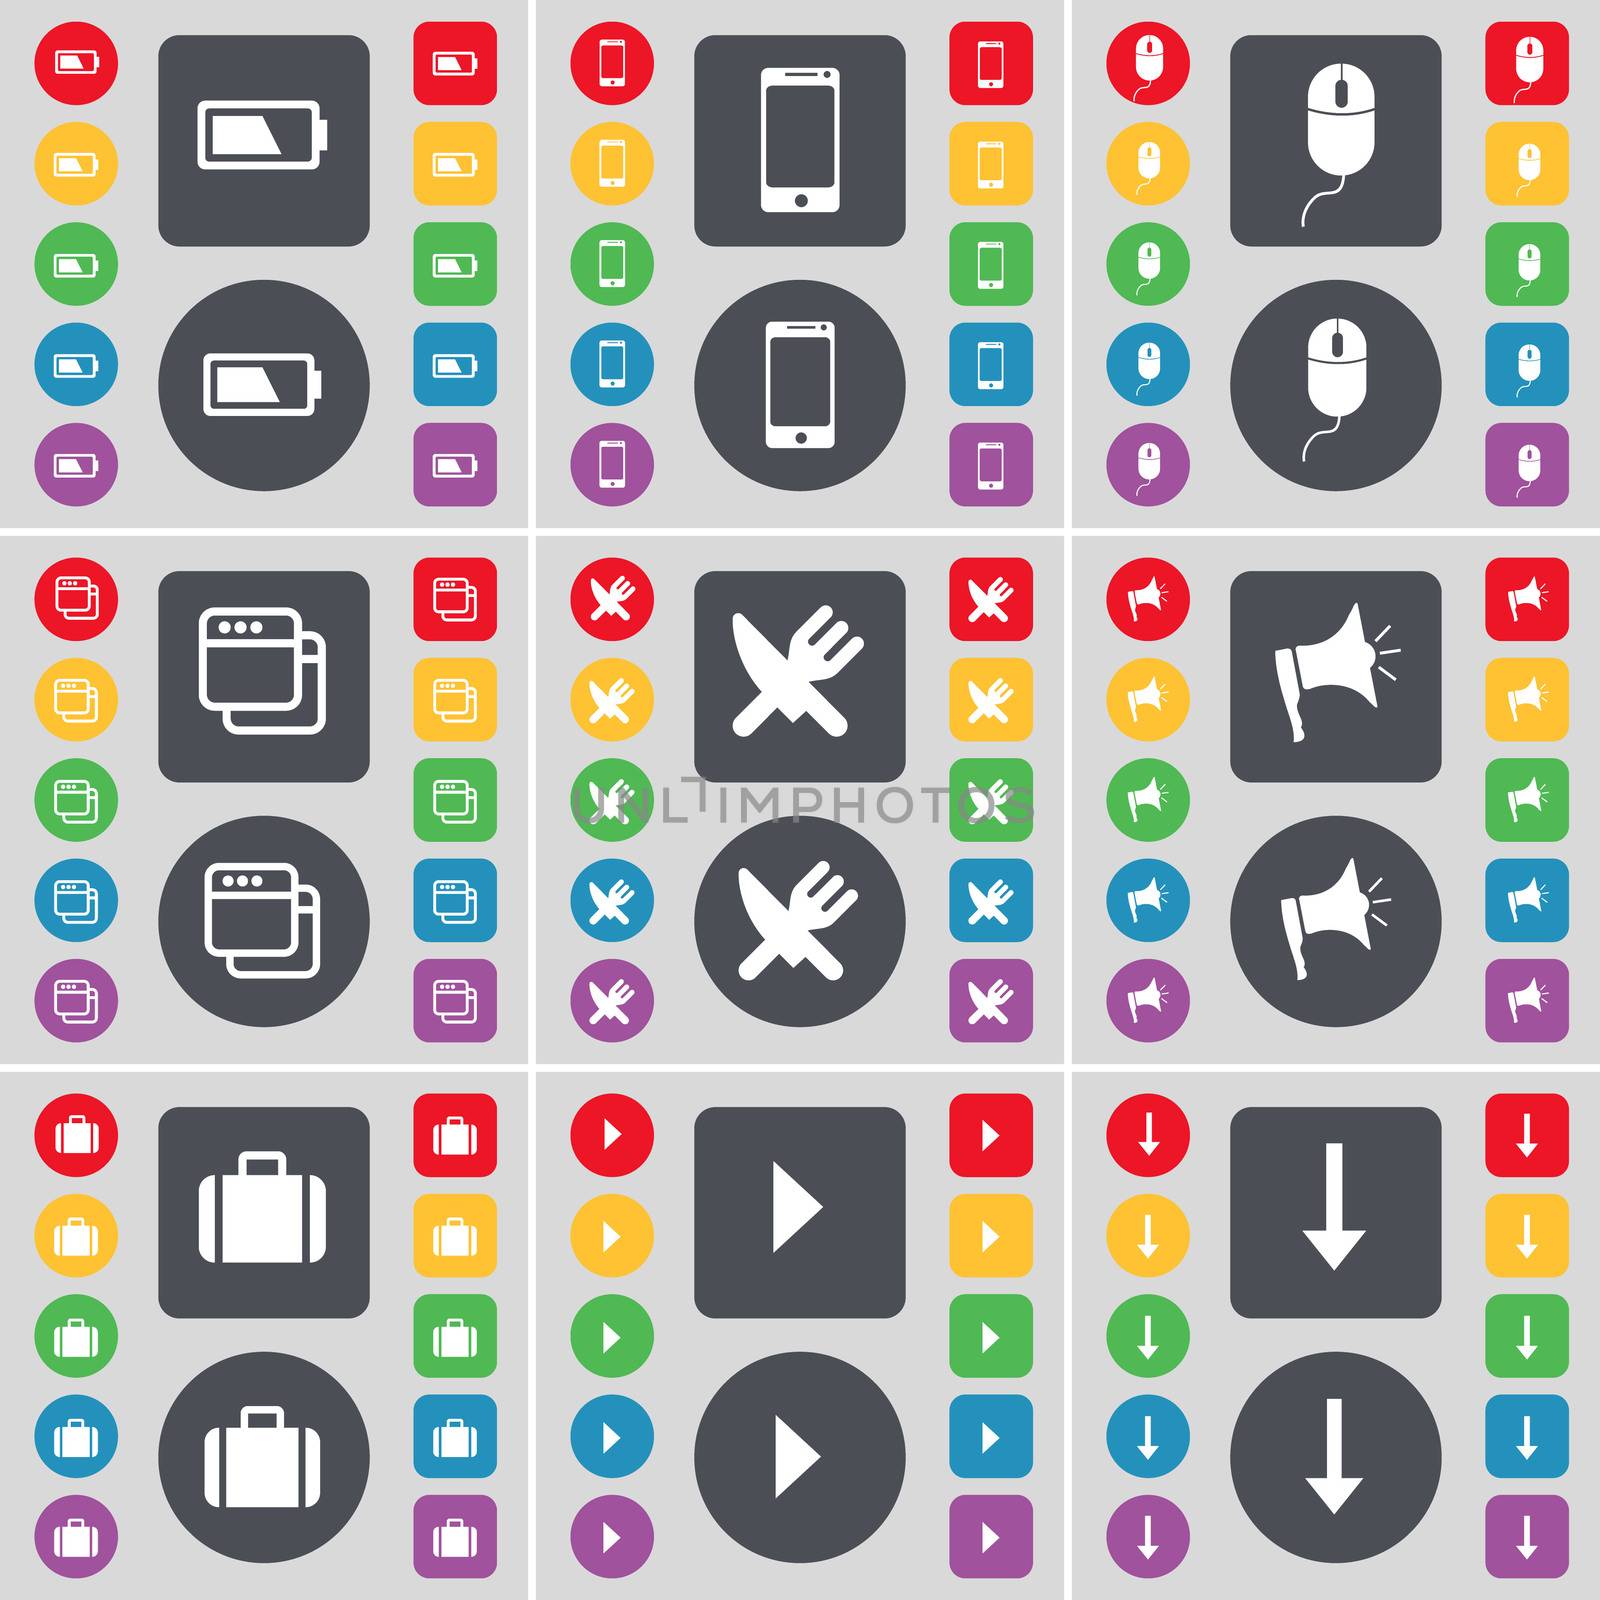 Battery, Smartphone, Mouse, Window, Fork and knife, Megaphone, Suitcase, Media play, Arrow down icon symbol. A large set of flat, colored buttons for your design. illustration